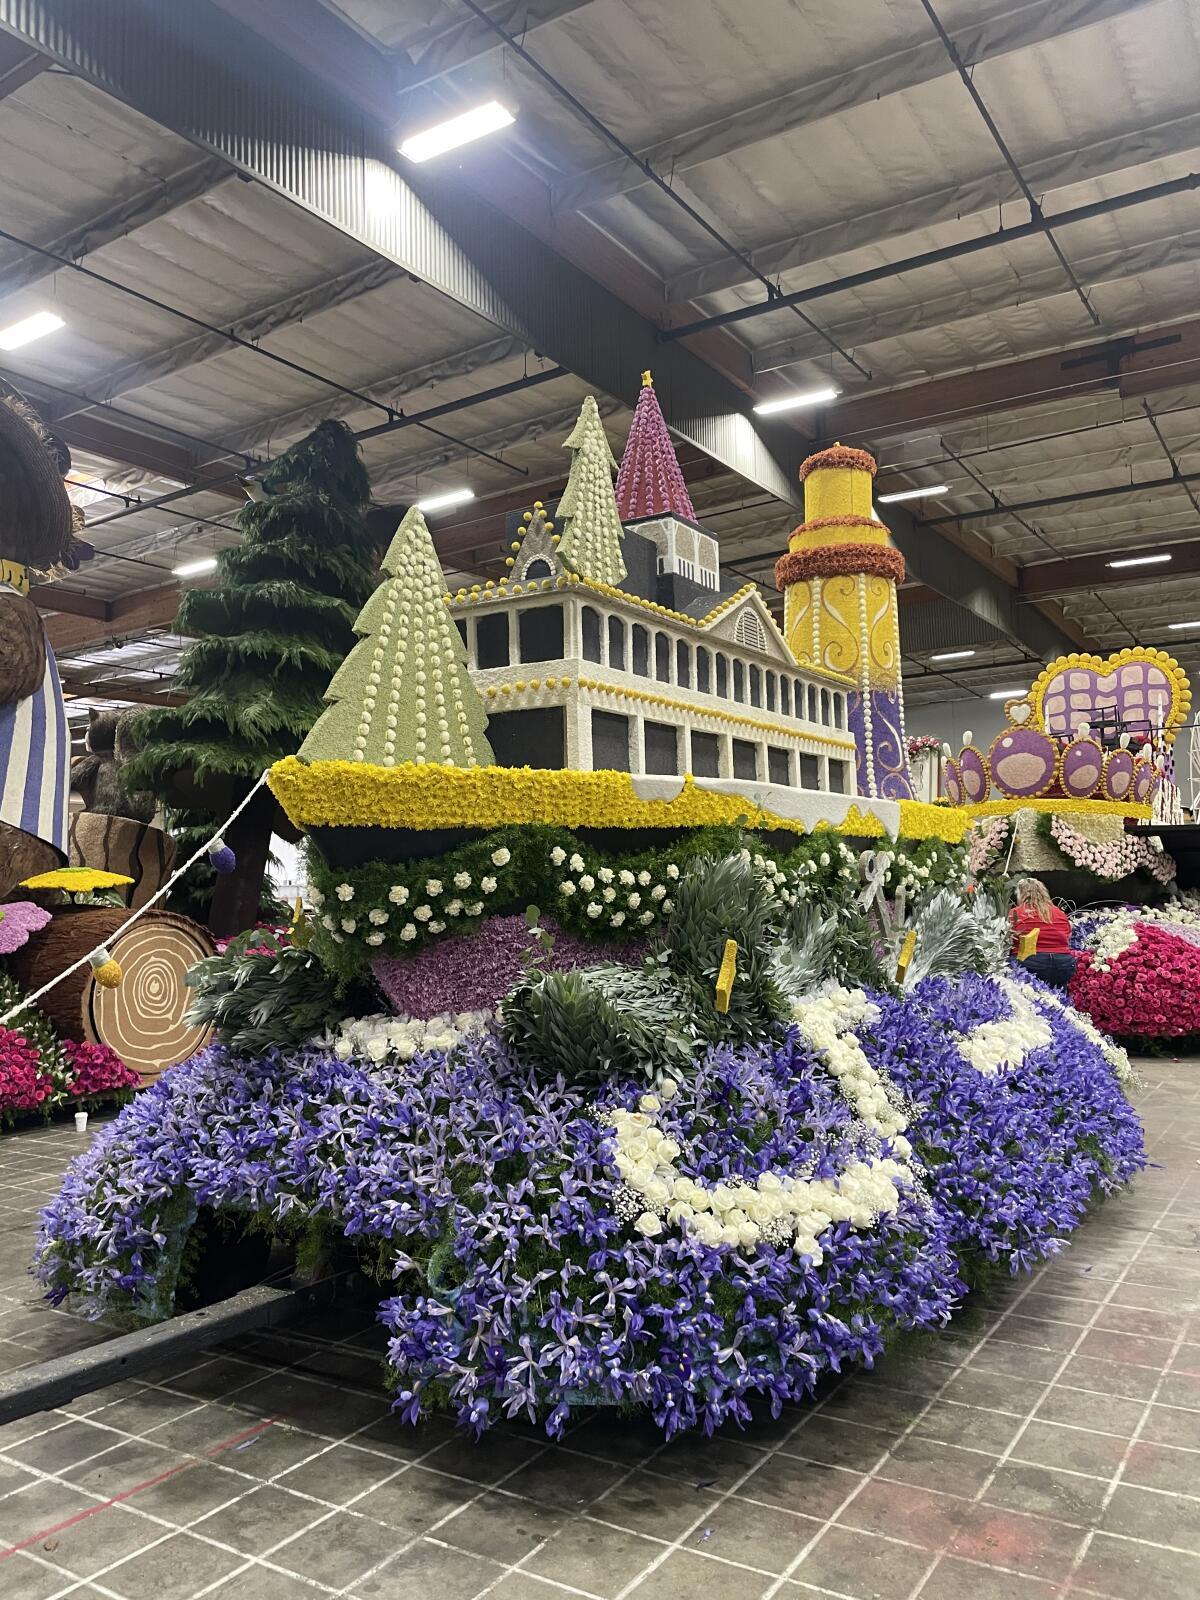 A finished section of the "Jingle on the Waves" float pays homage to the Balboa Pavilion.